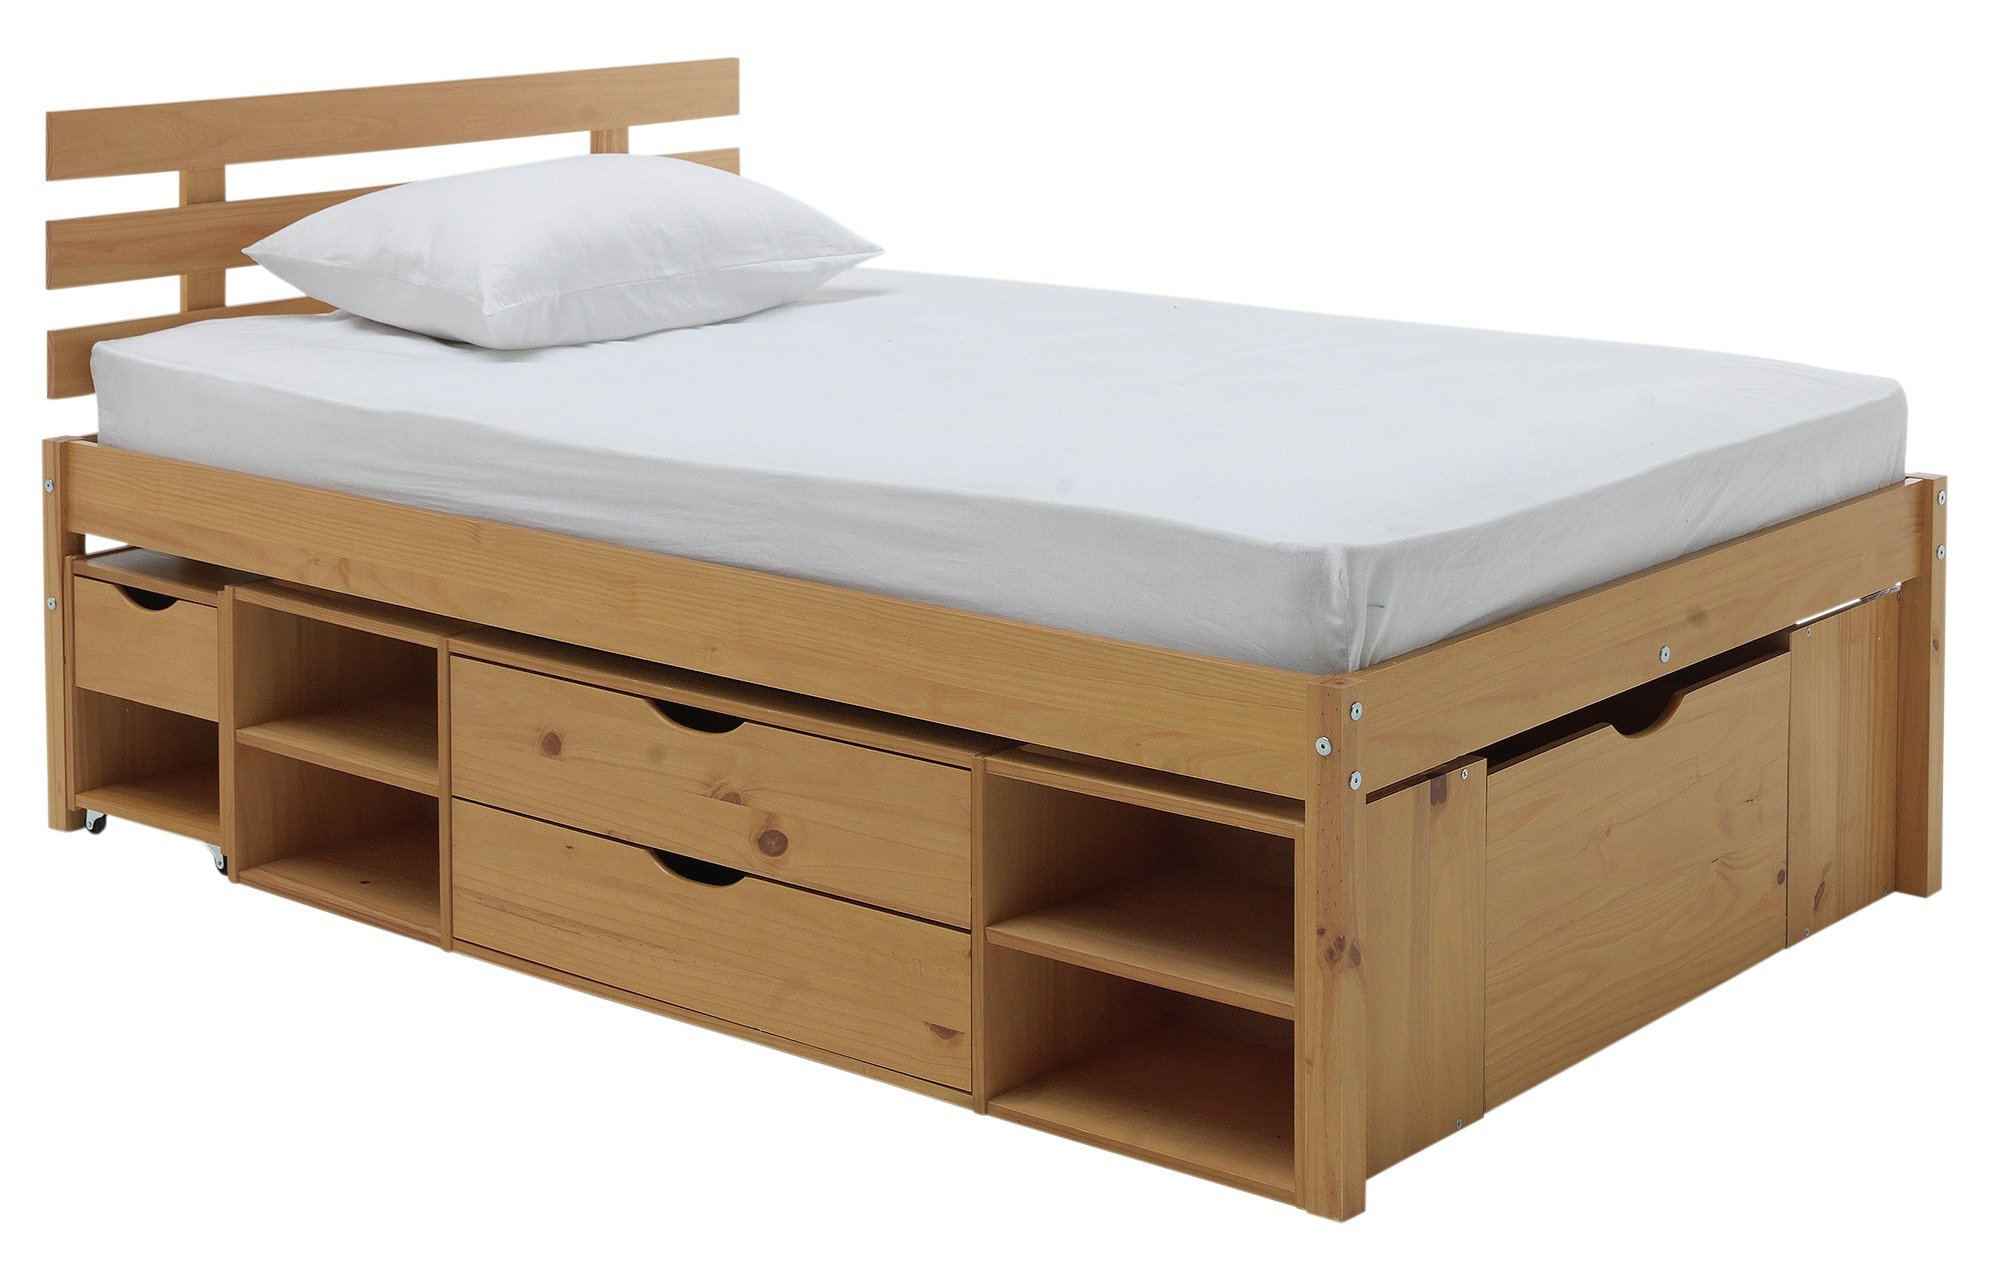 mattress man small double bed